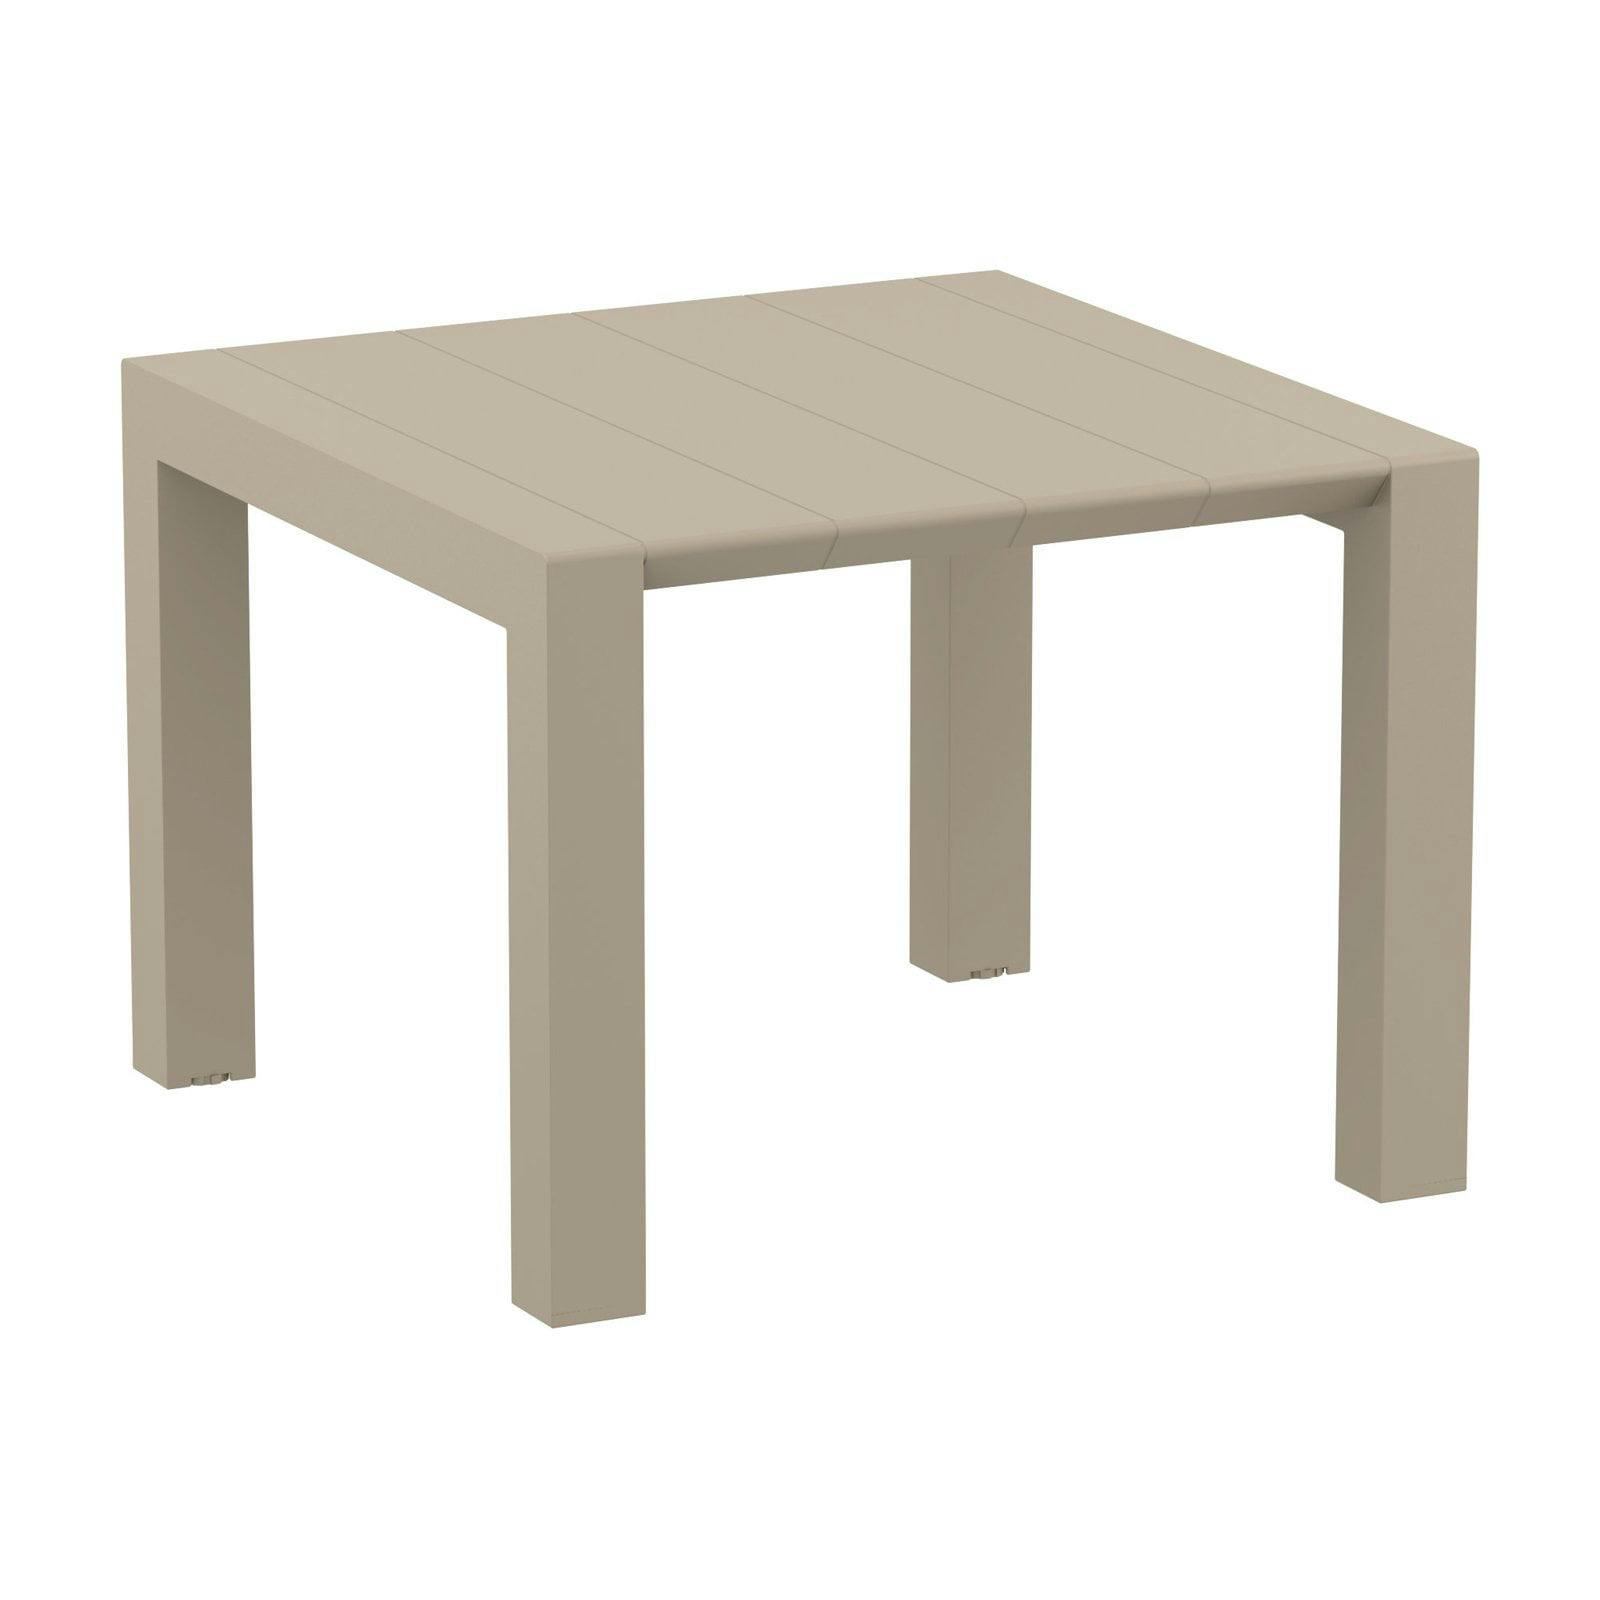 Taupe Extendable Square Patio Dining Table for 4-6 Guests